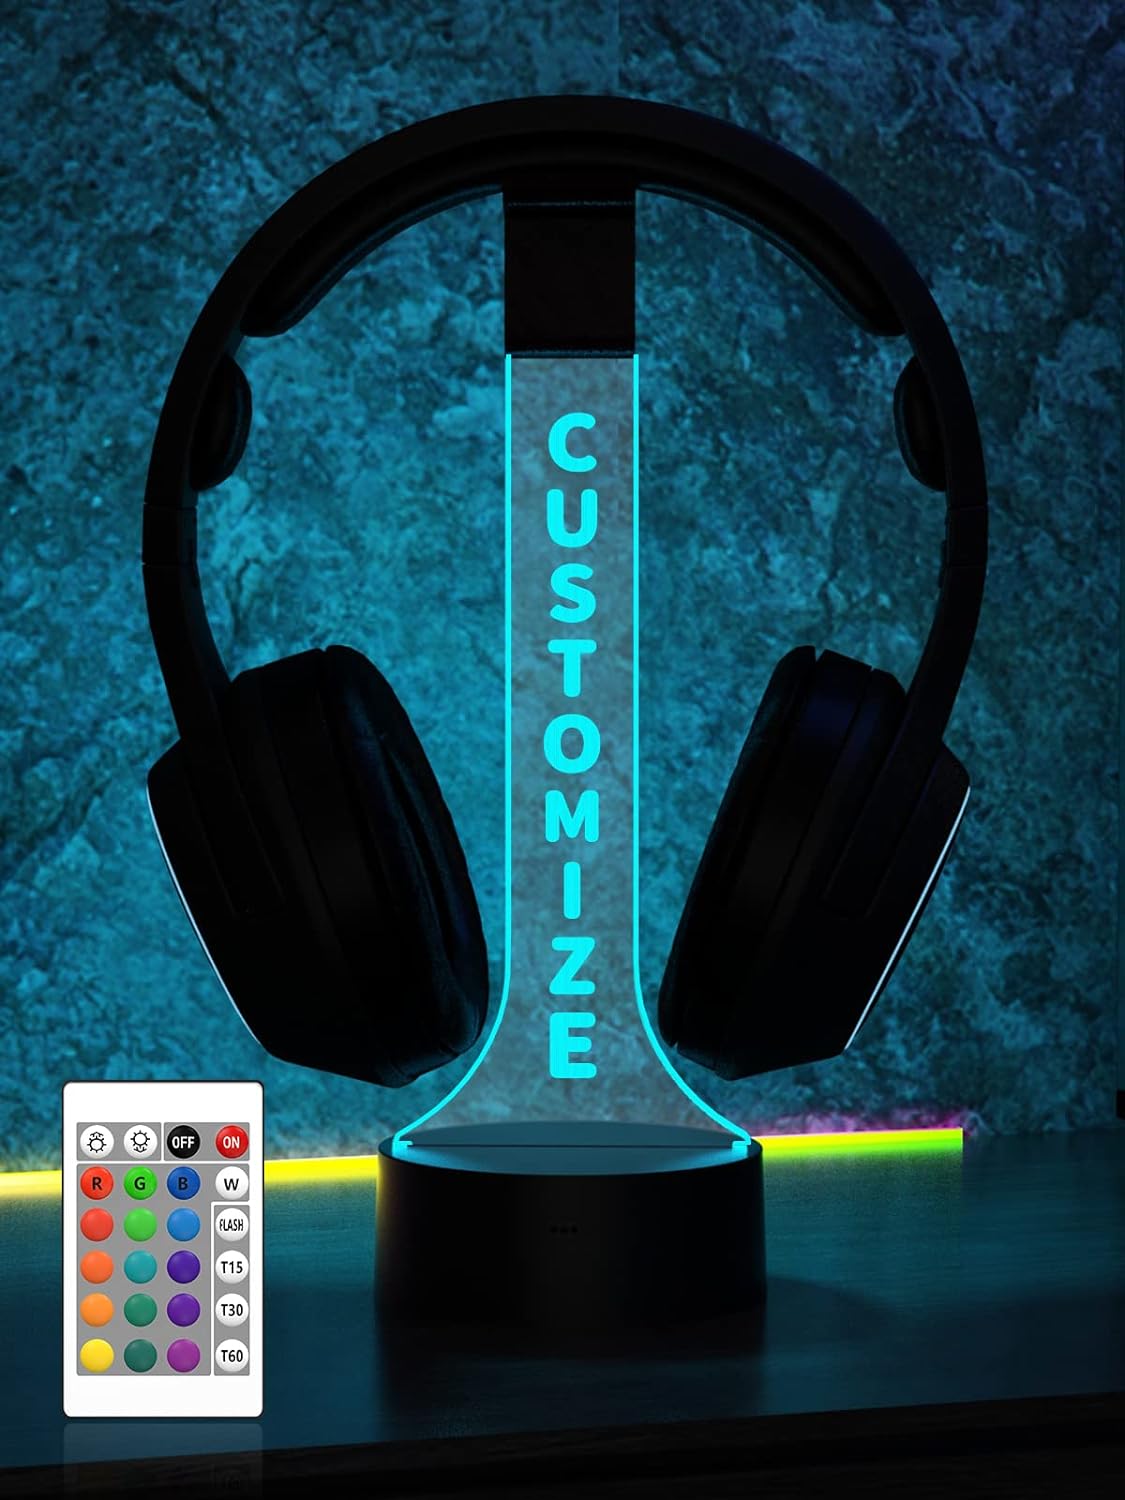 YuanDian Personalized Light up Headphone Stand for Desk, Gaming Headset Holder RGB with 16 Color Lights for Game Room Decor, Cool Gamer Gifts for Men Boyfriend (Customize)